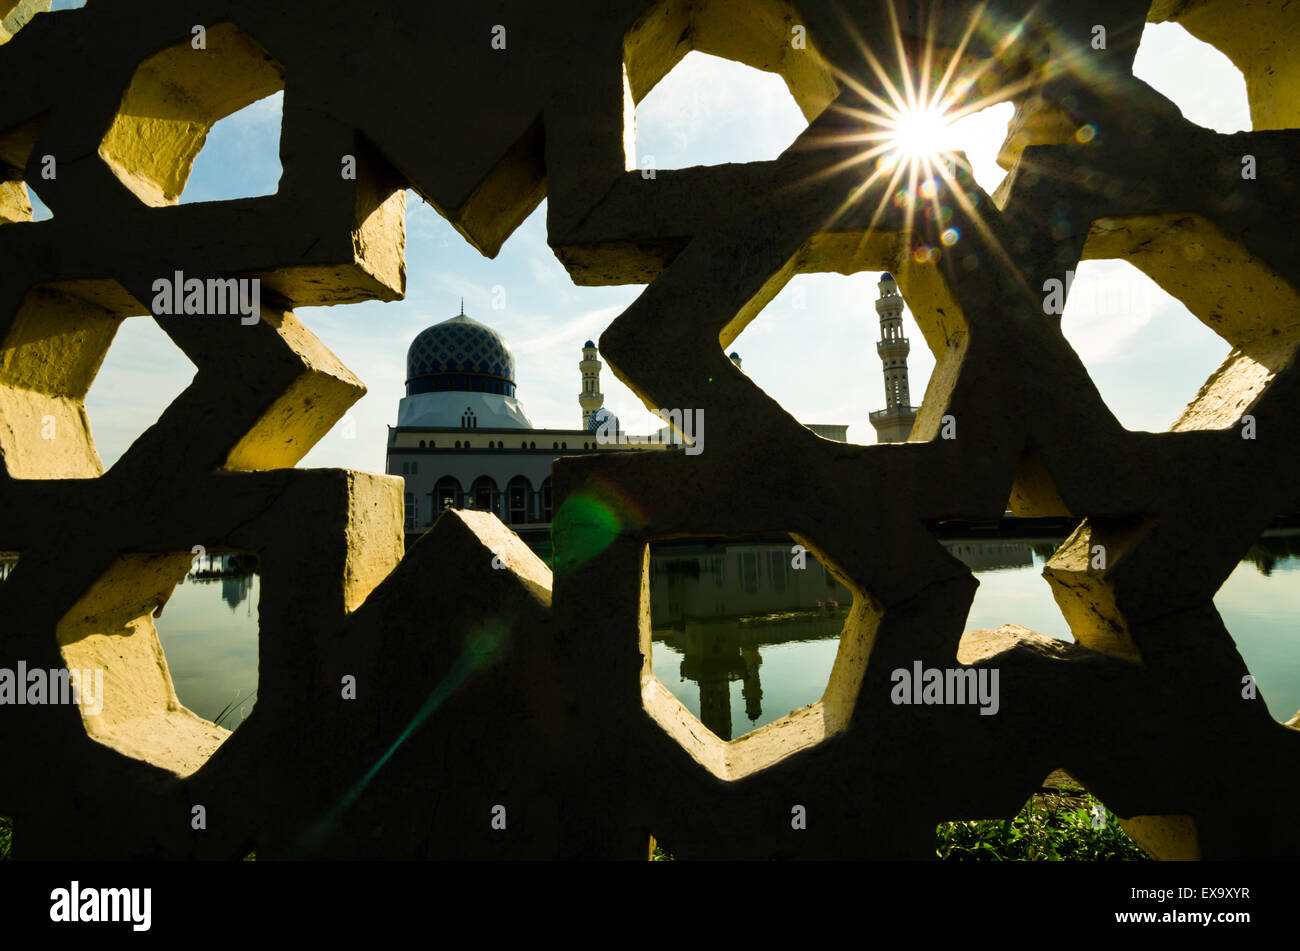 Sunray with the Kota Kinabalu City Mosque in Sabah. It is the second main mosque in Kota Kinabalu, Sabah, Malaysia, after State Mosque in Sembulan. Stock Photo